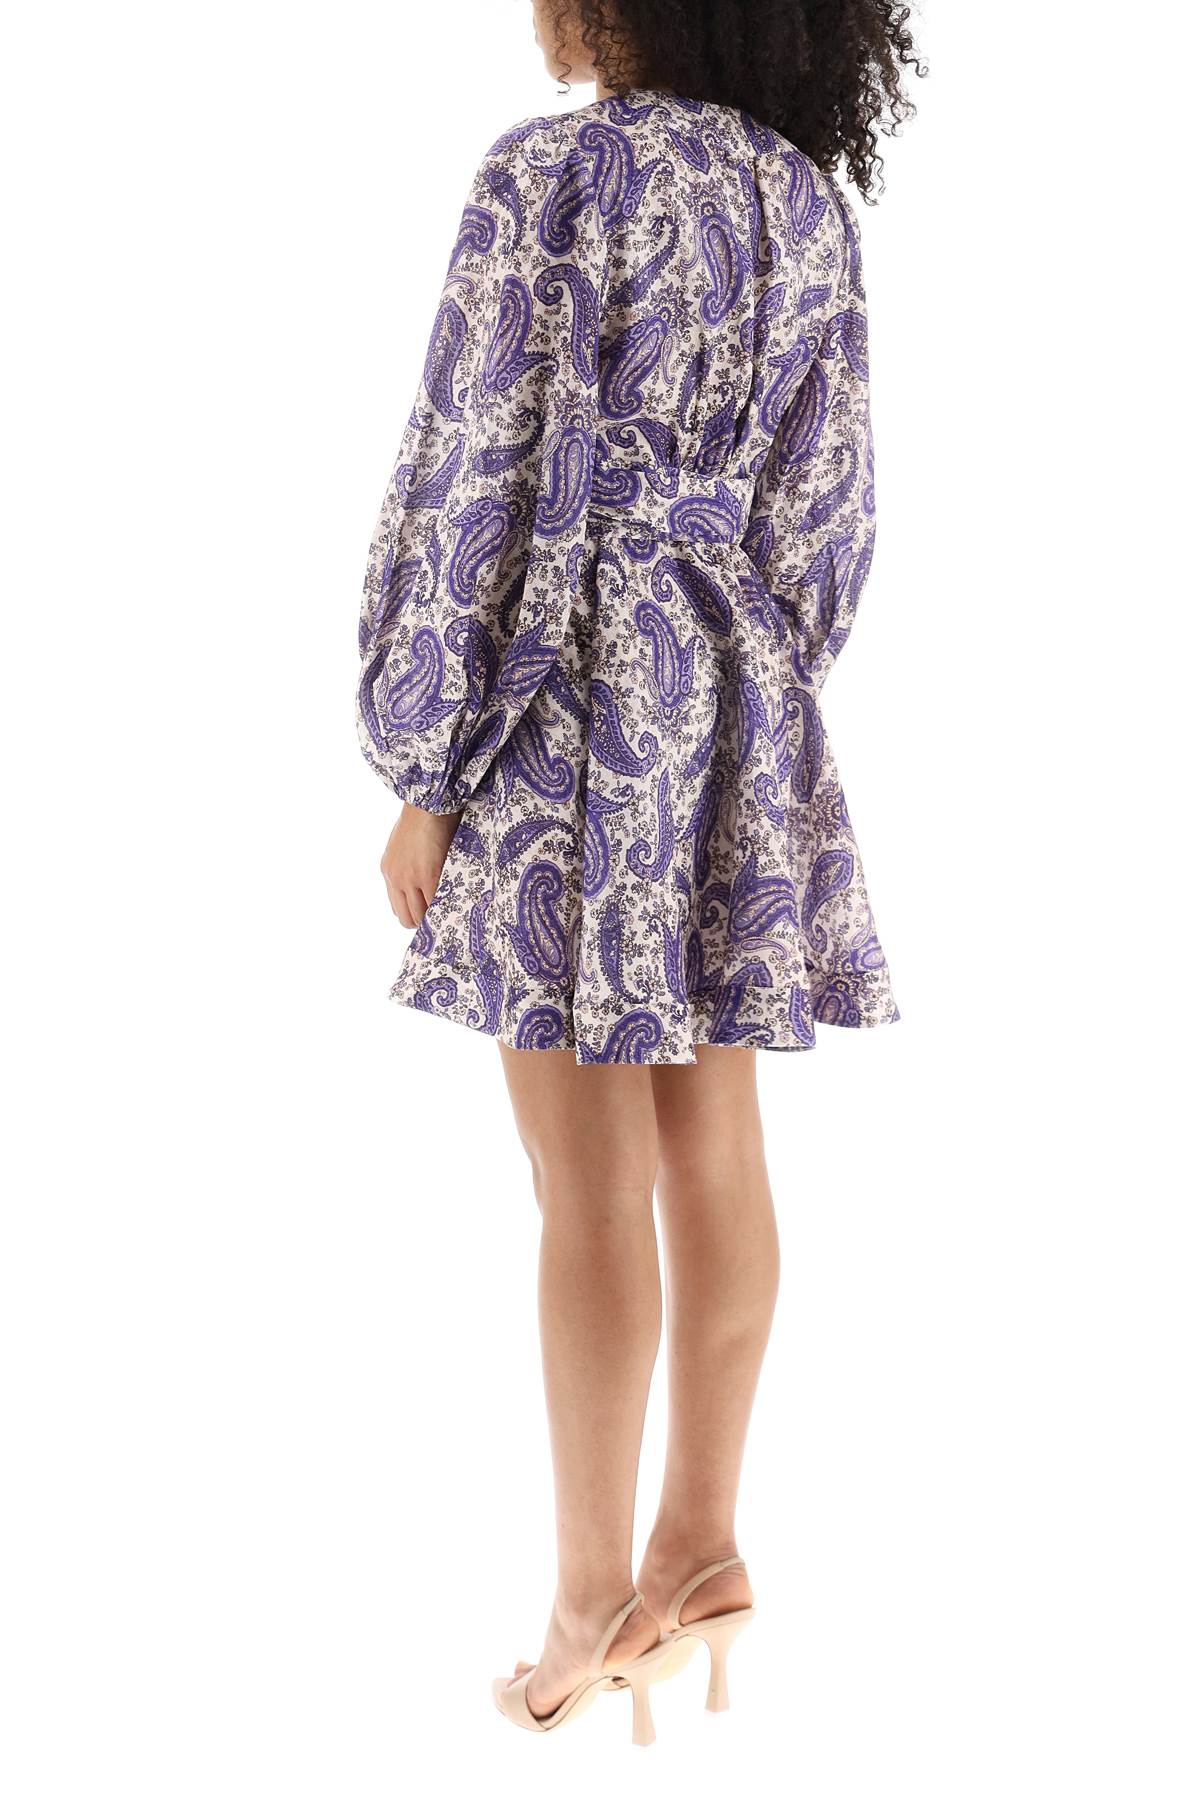 ZIMMERMANN Feminine Floral Dress in Mixed Colors for FW23